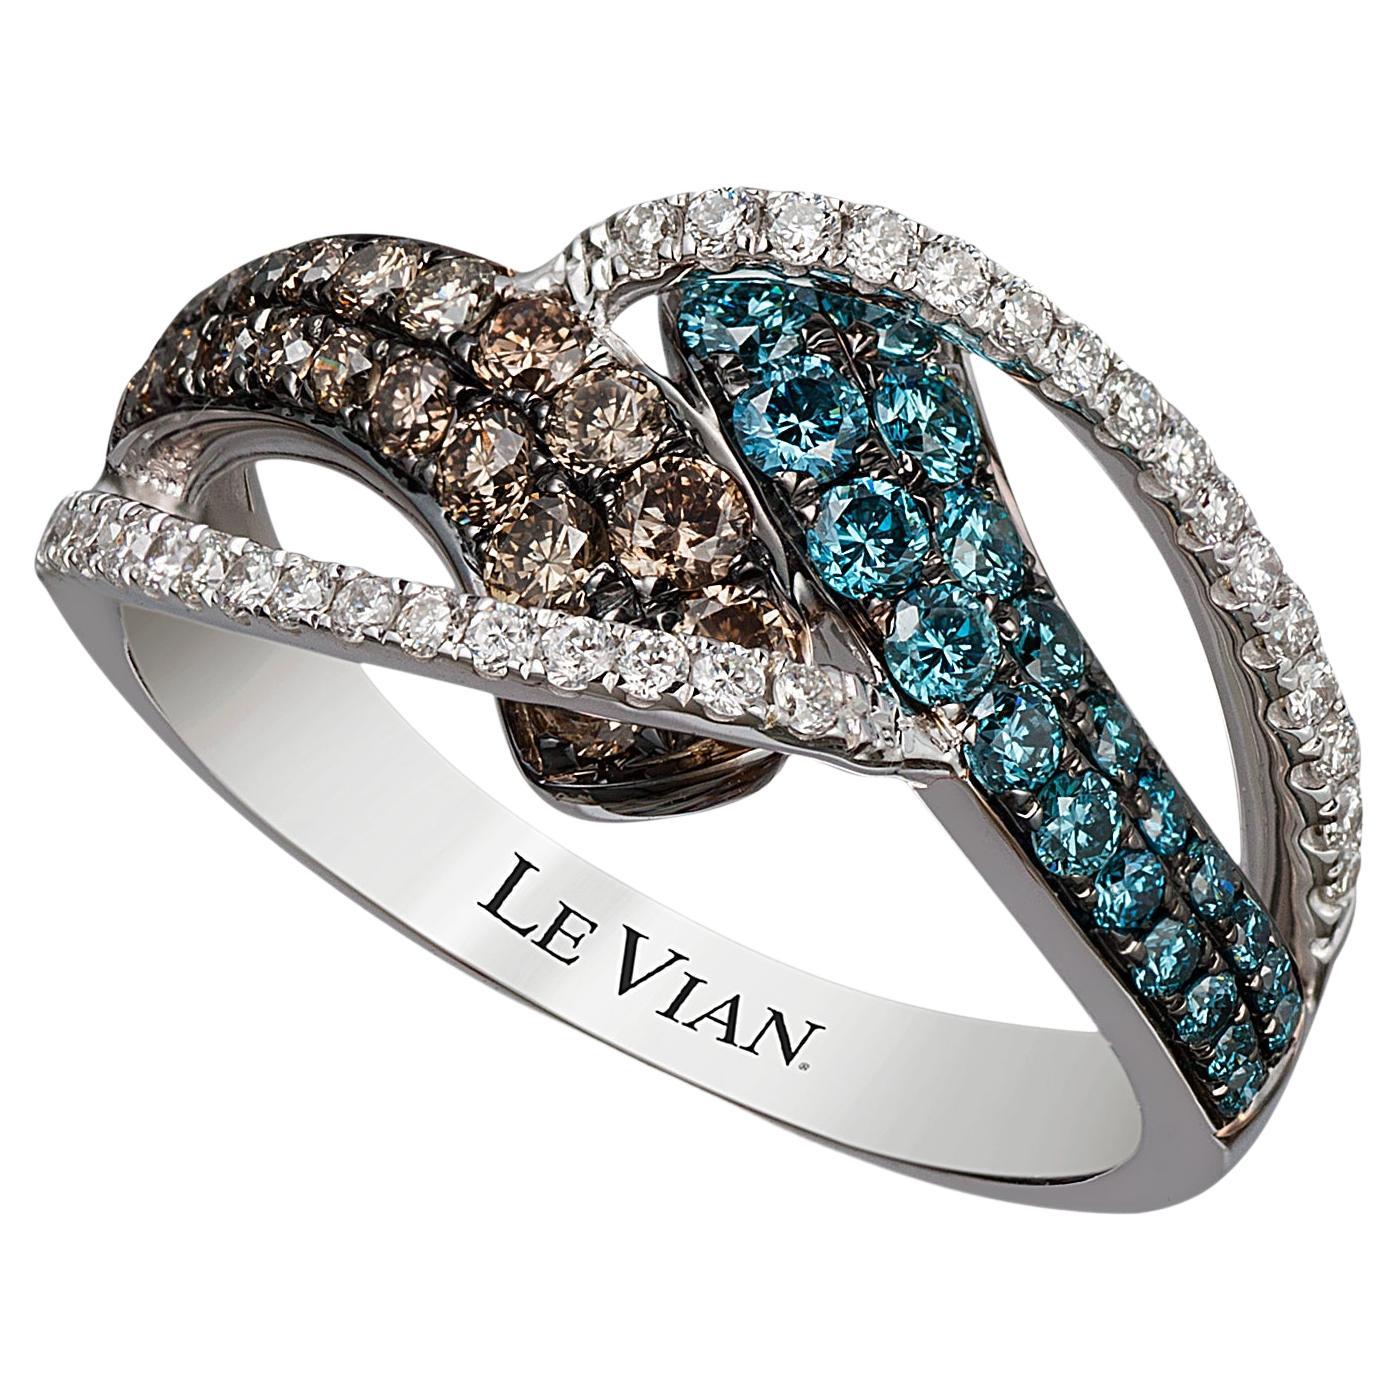 Levian Ring 7 8 Cts Blue Chocolate White Natural Diamonds in 14K White Gold